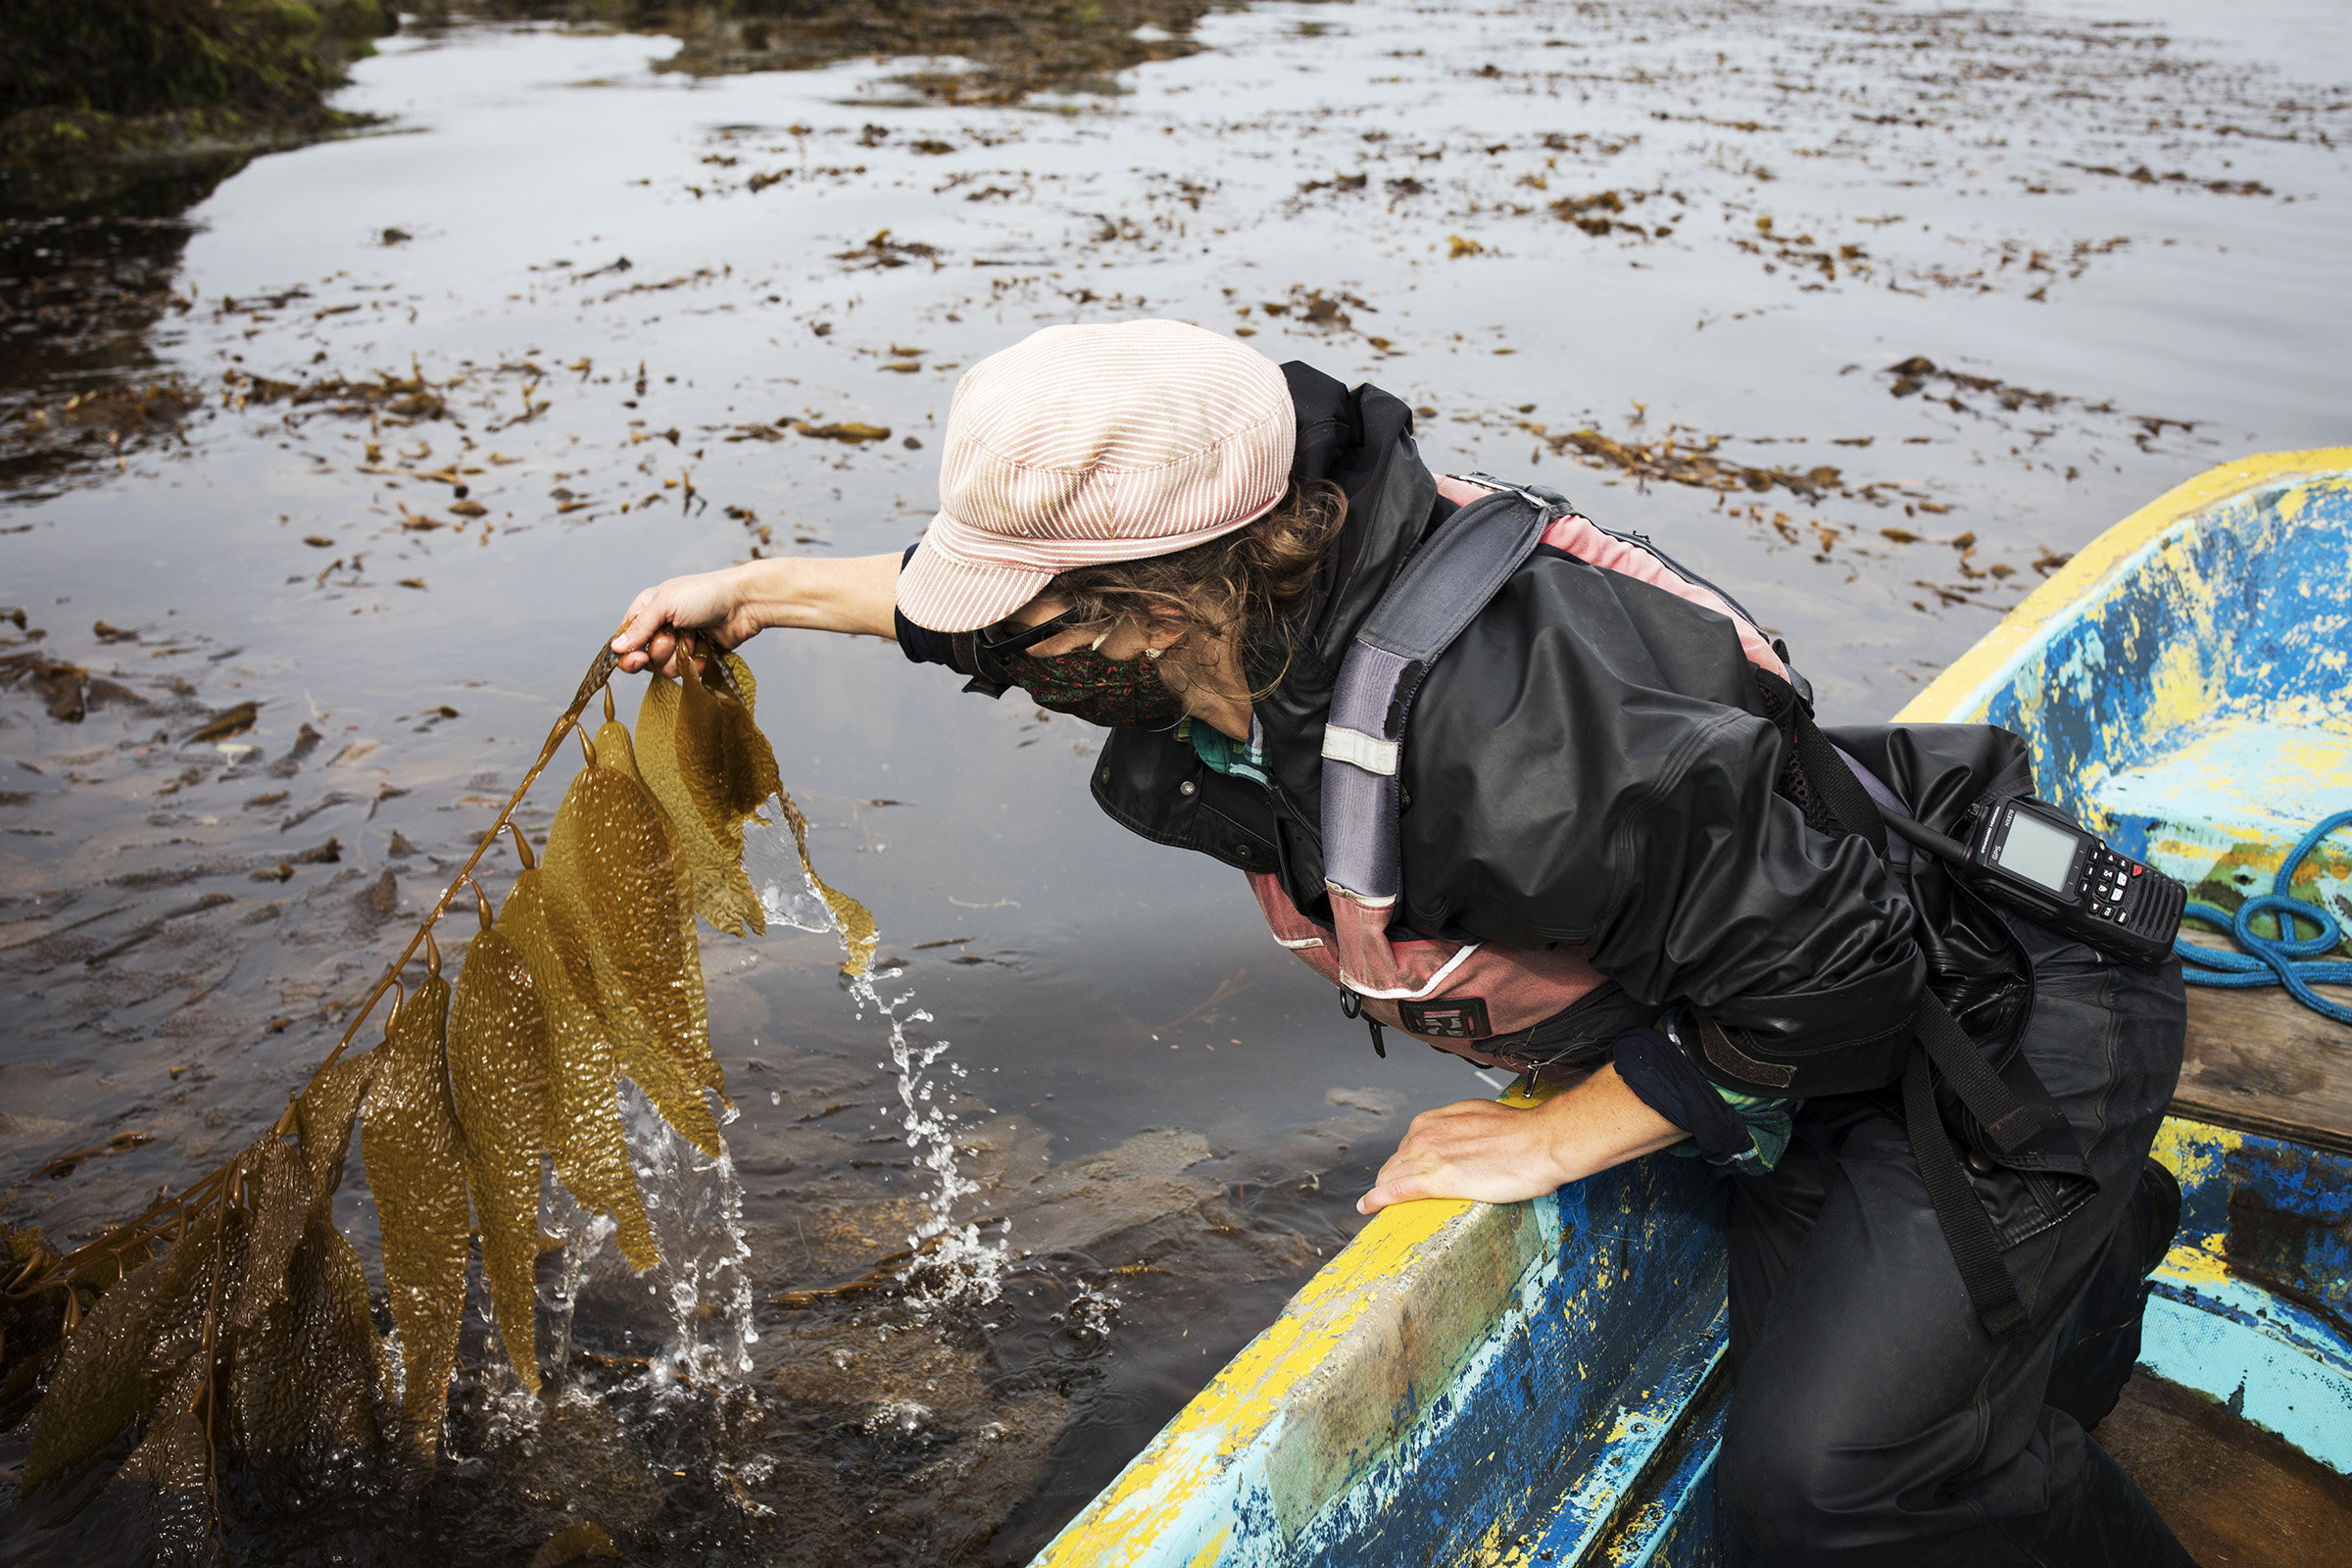 Amy McConnell, a Canadian Kelp Resources Ltd. lab technician, holds up a piece of giant kelp in the Trevor Channel on Vancouver Island, on Aug. 19, 2020. (Melissa Renwick for TIME)